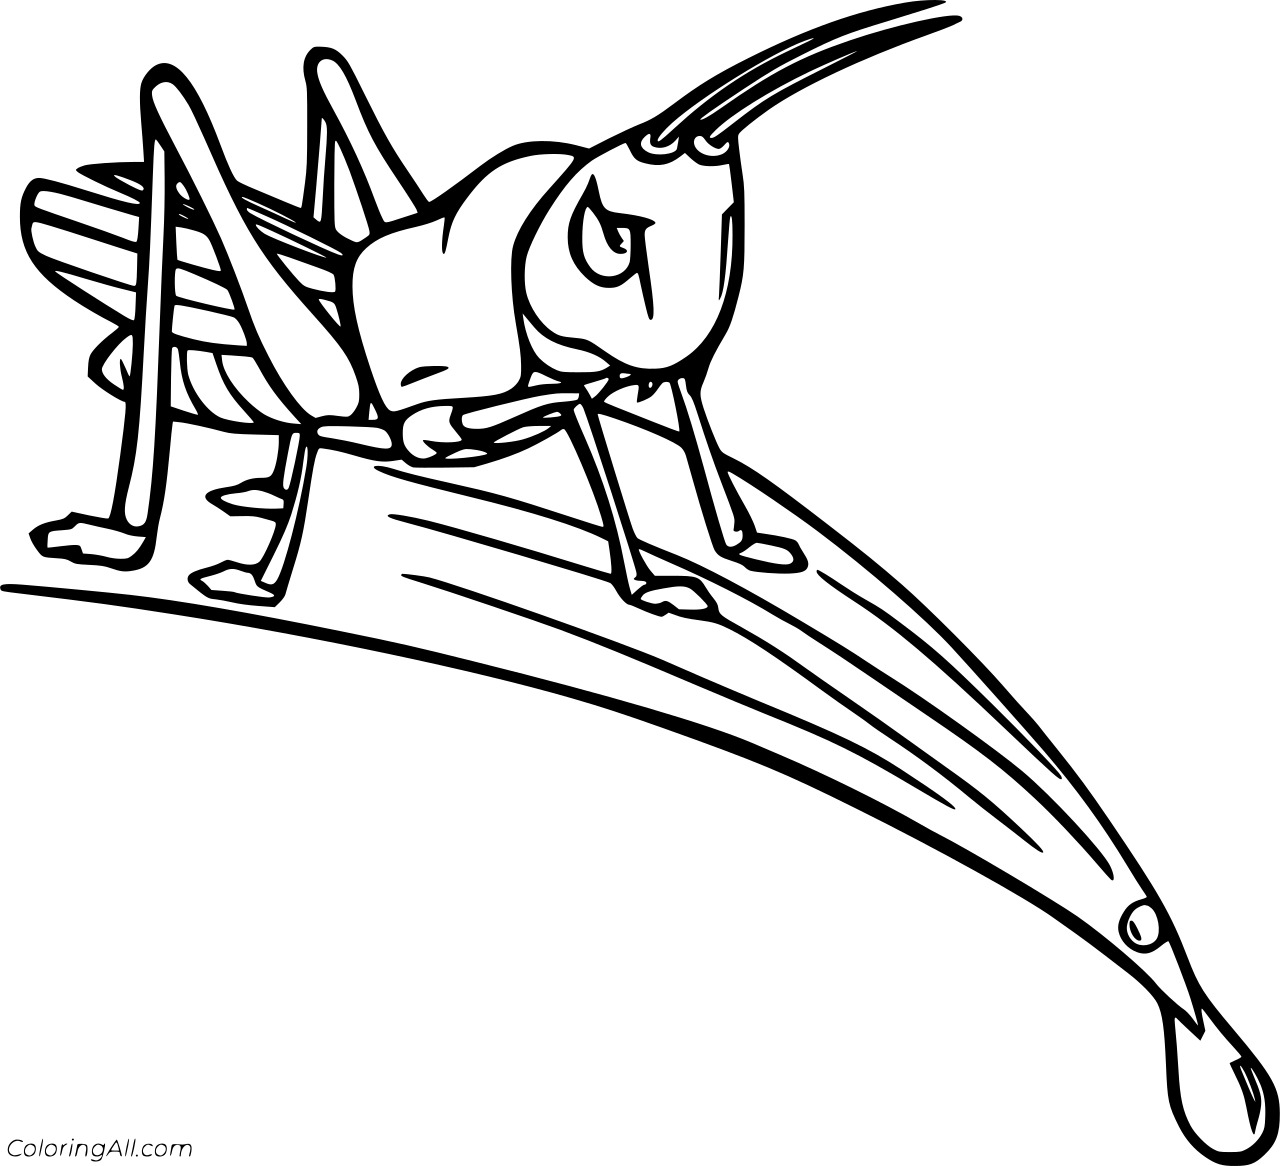 Grasshopper and a Dewdrop Coloring Page